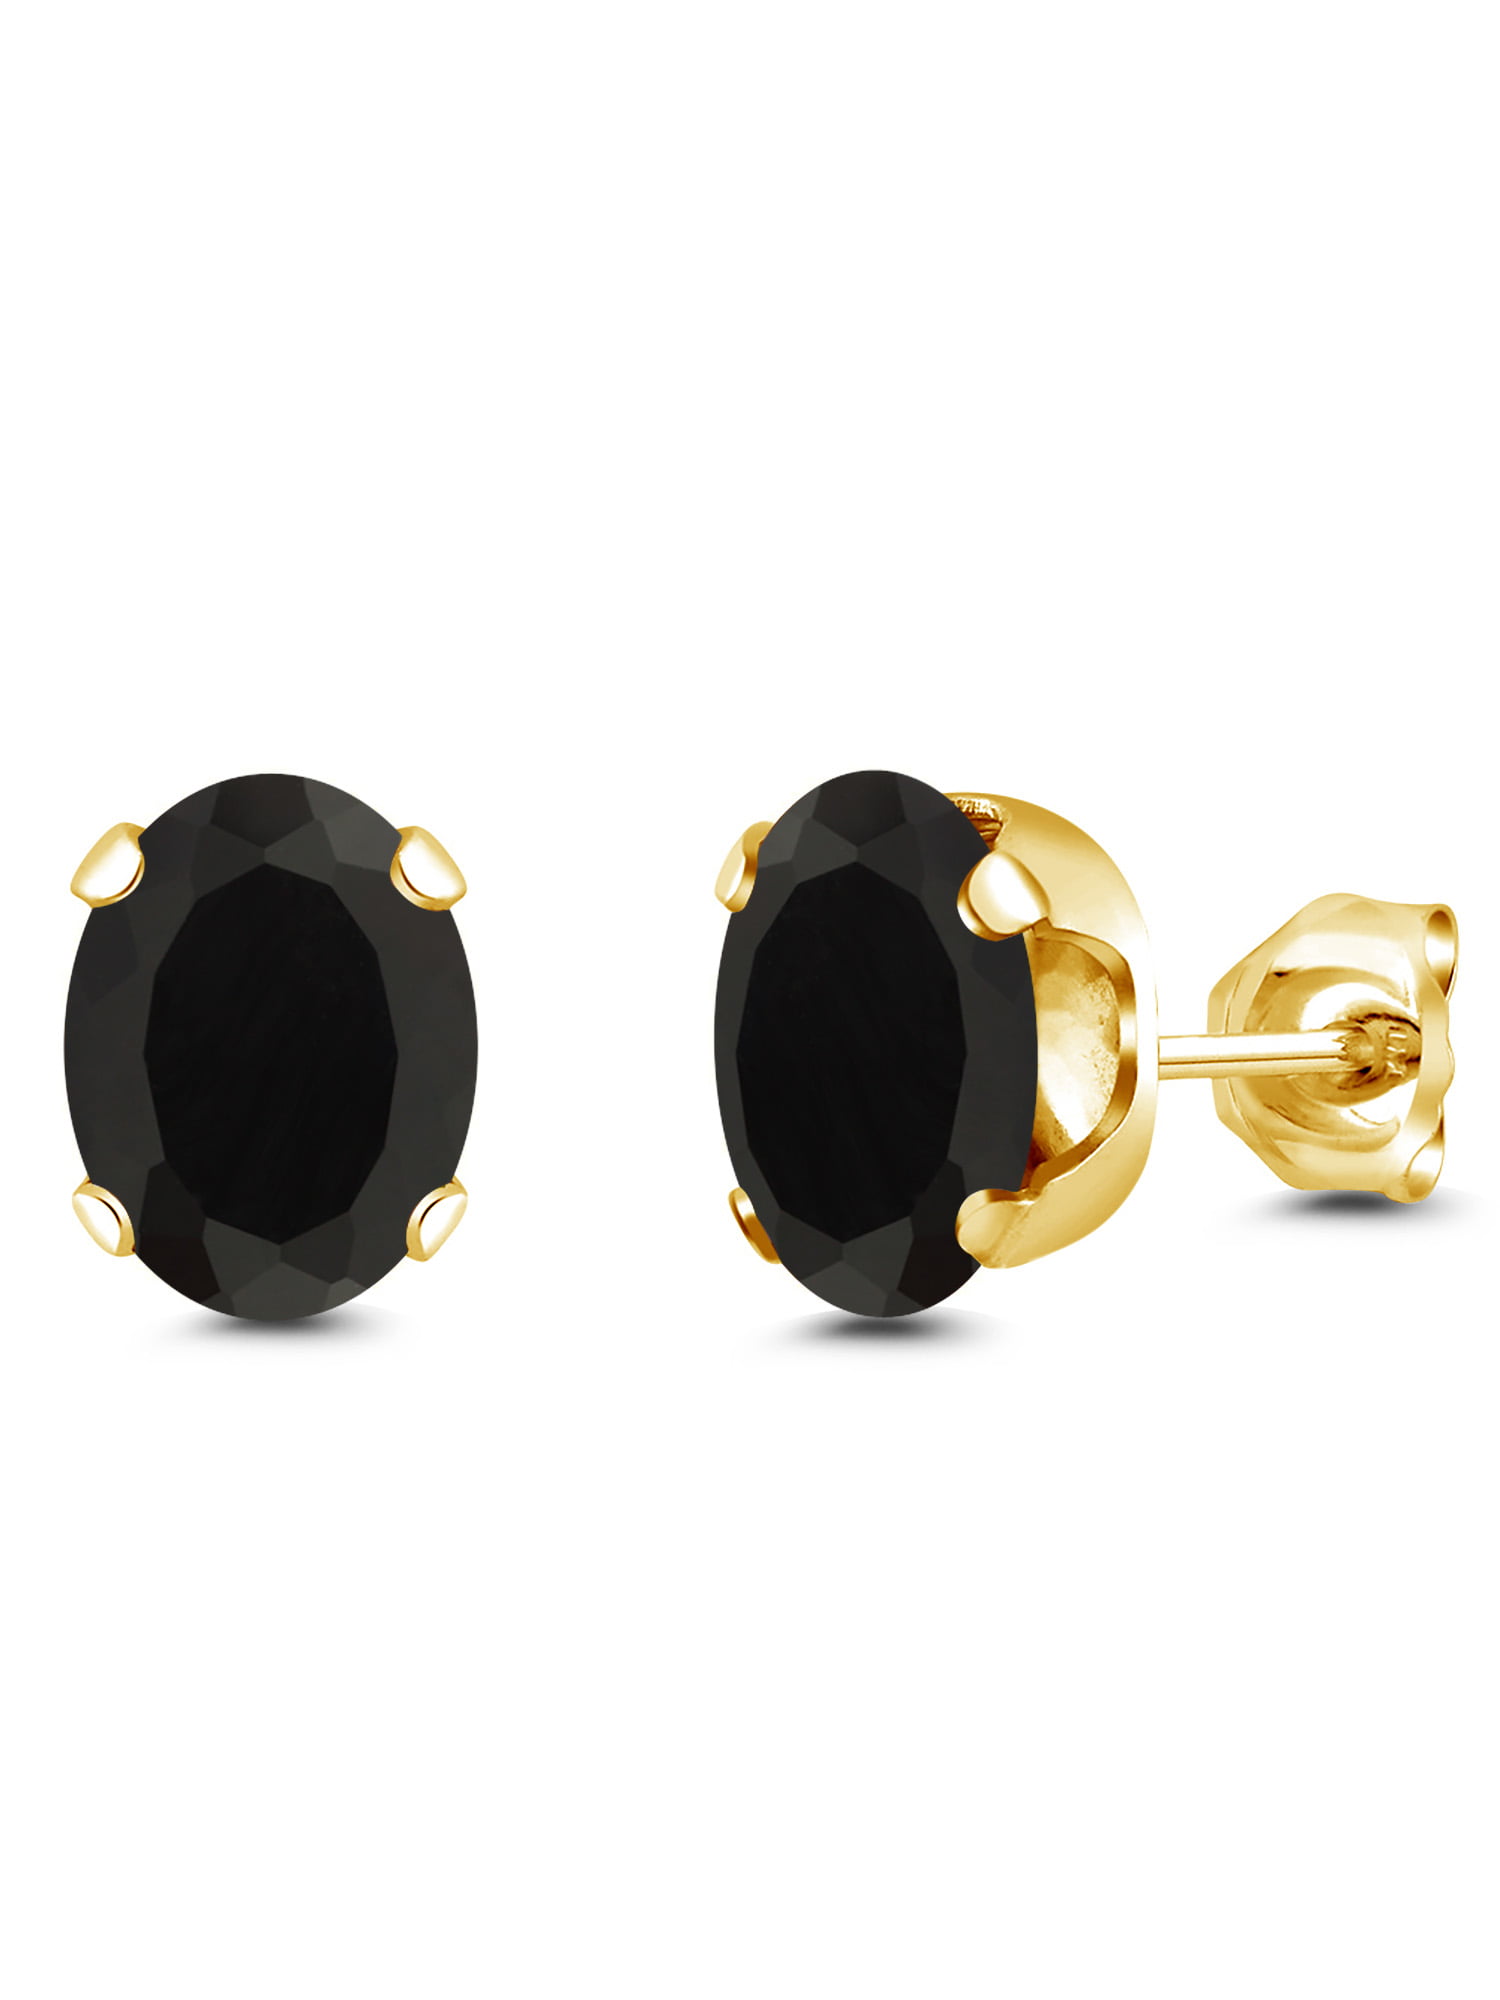 Details about   Natural Black Onyx 18k Gold Plated Silver Handmade Stud Earring Jewelry 